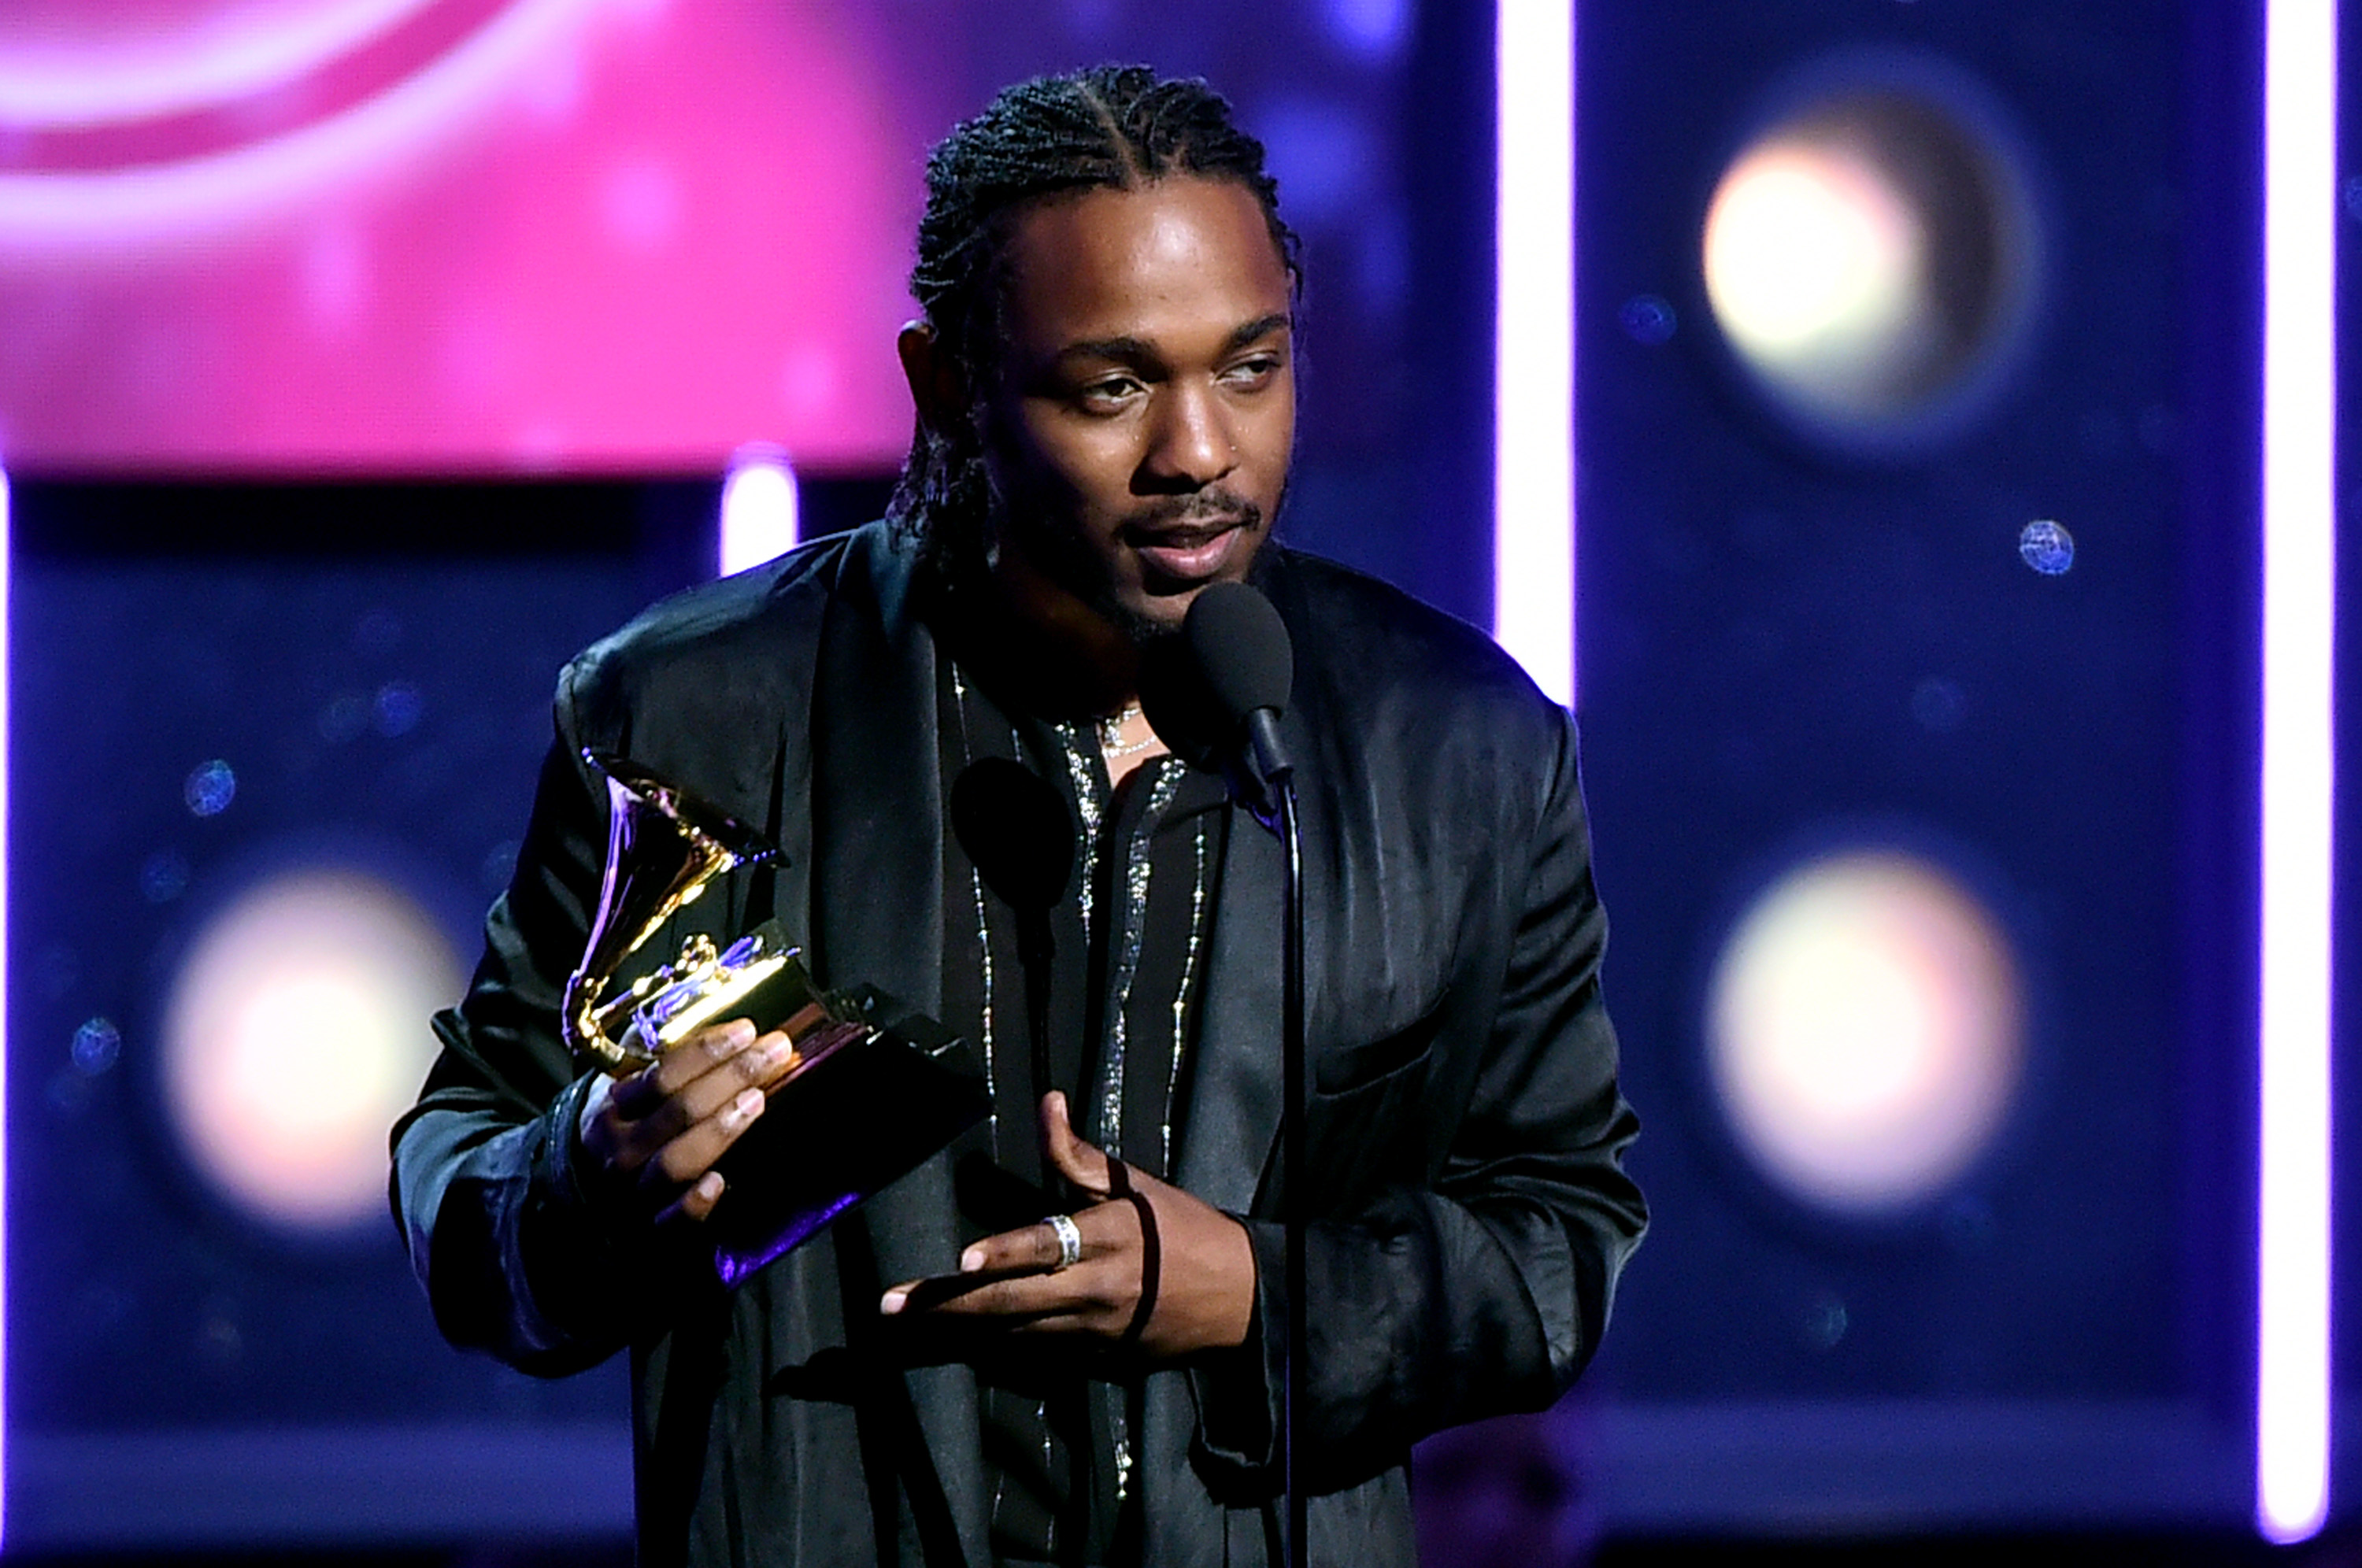 Kendrick Lamar’s debut on Power received great reactions on Twittter ...